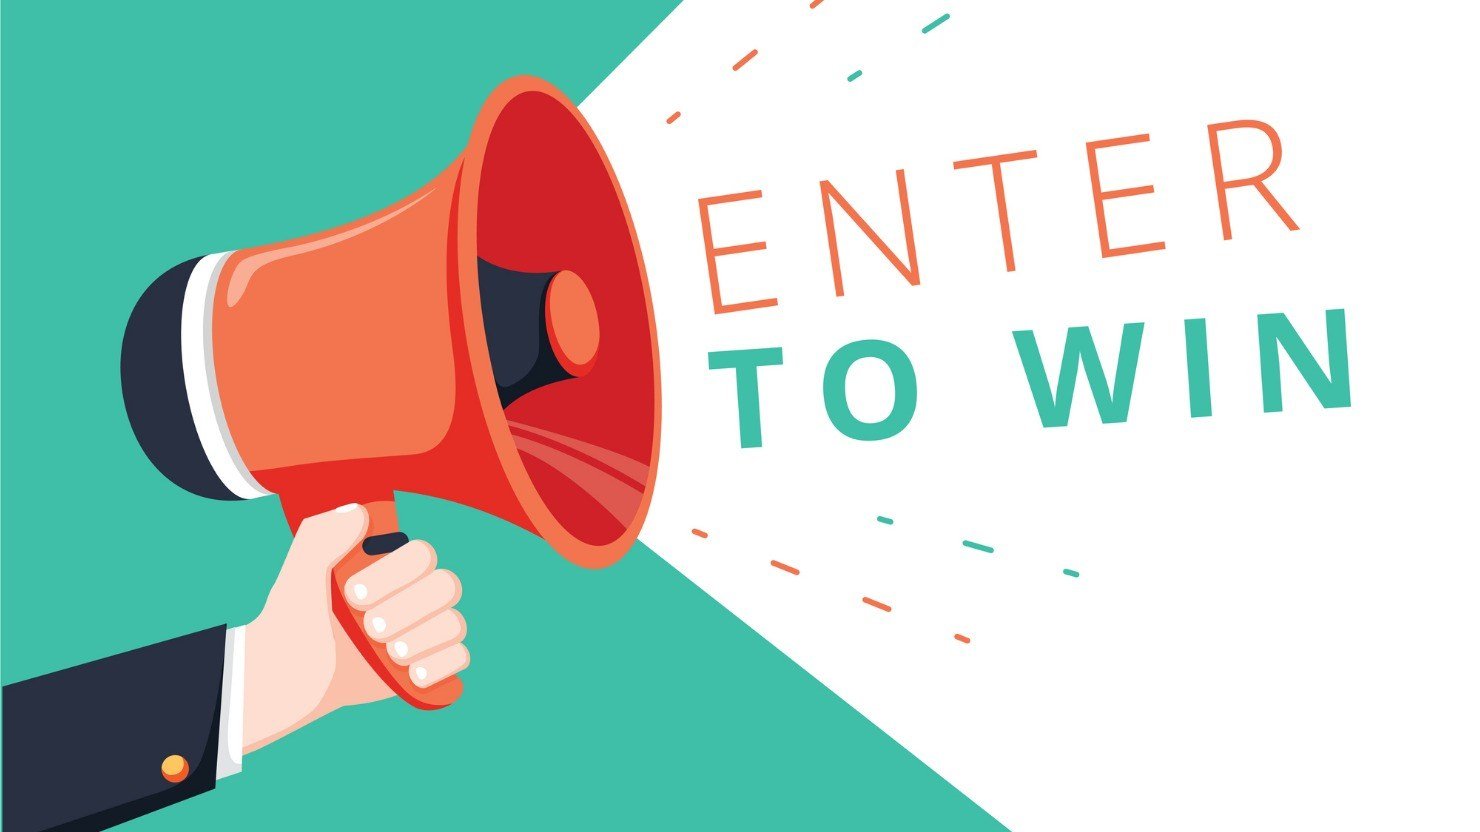 The Ultimate  Giveaways 2023 Guide - 18 Tips to Win or Organize  Viral Contests